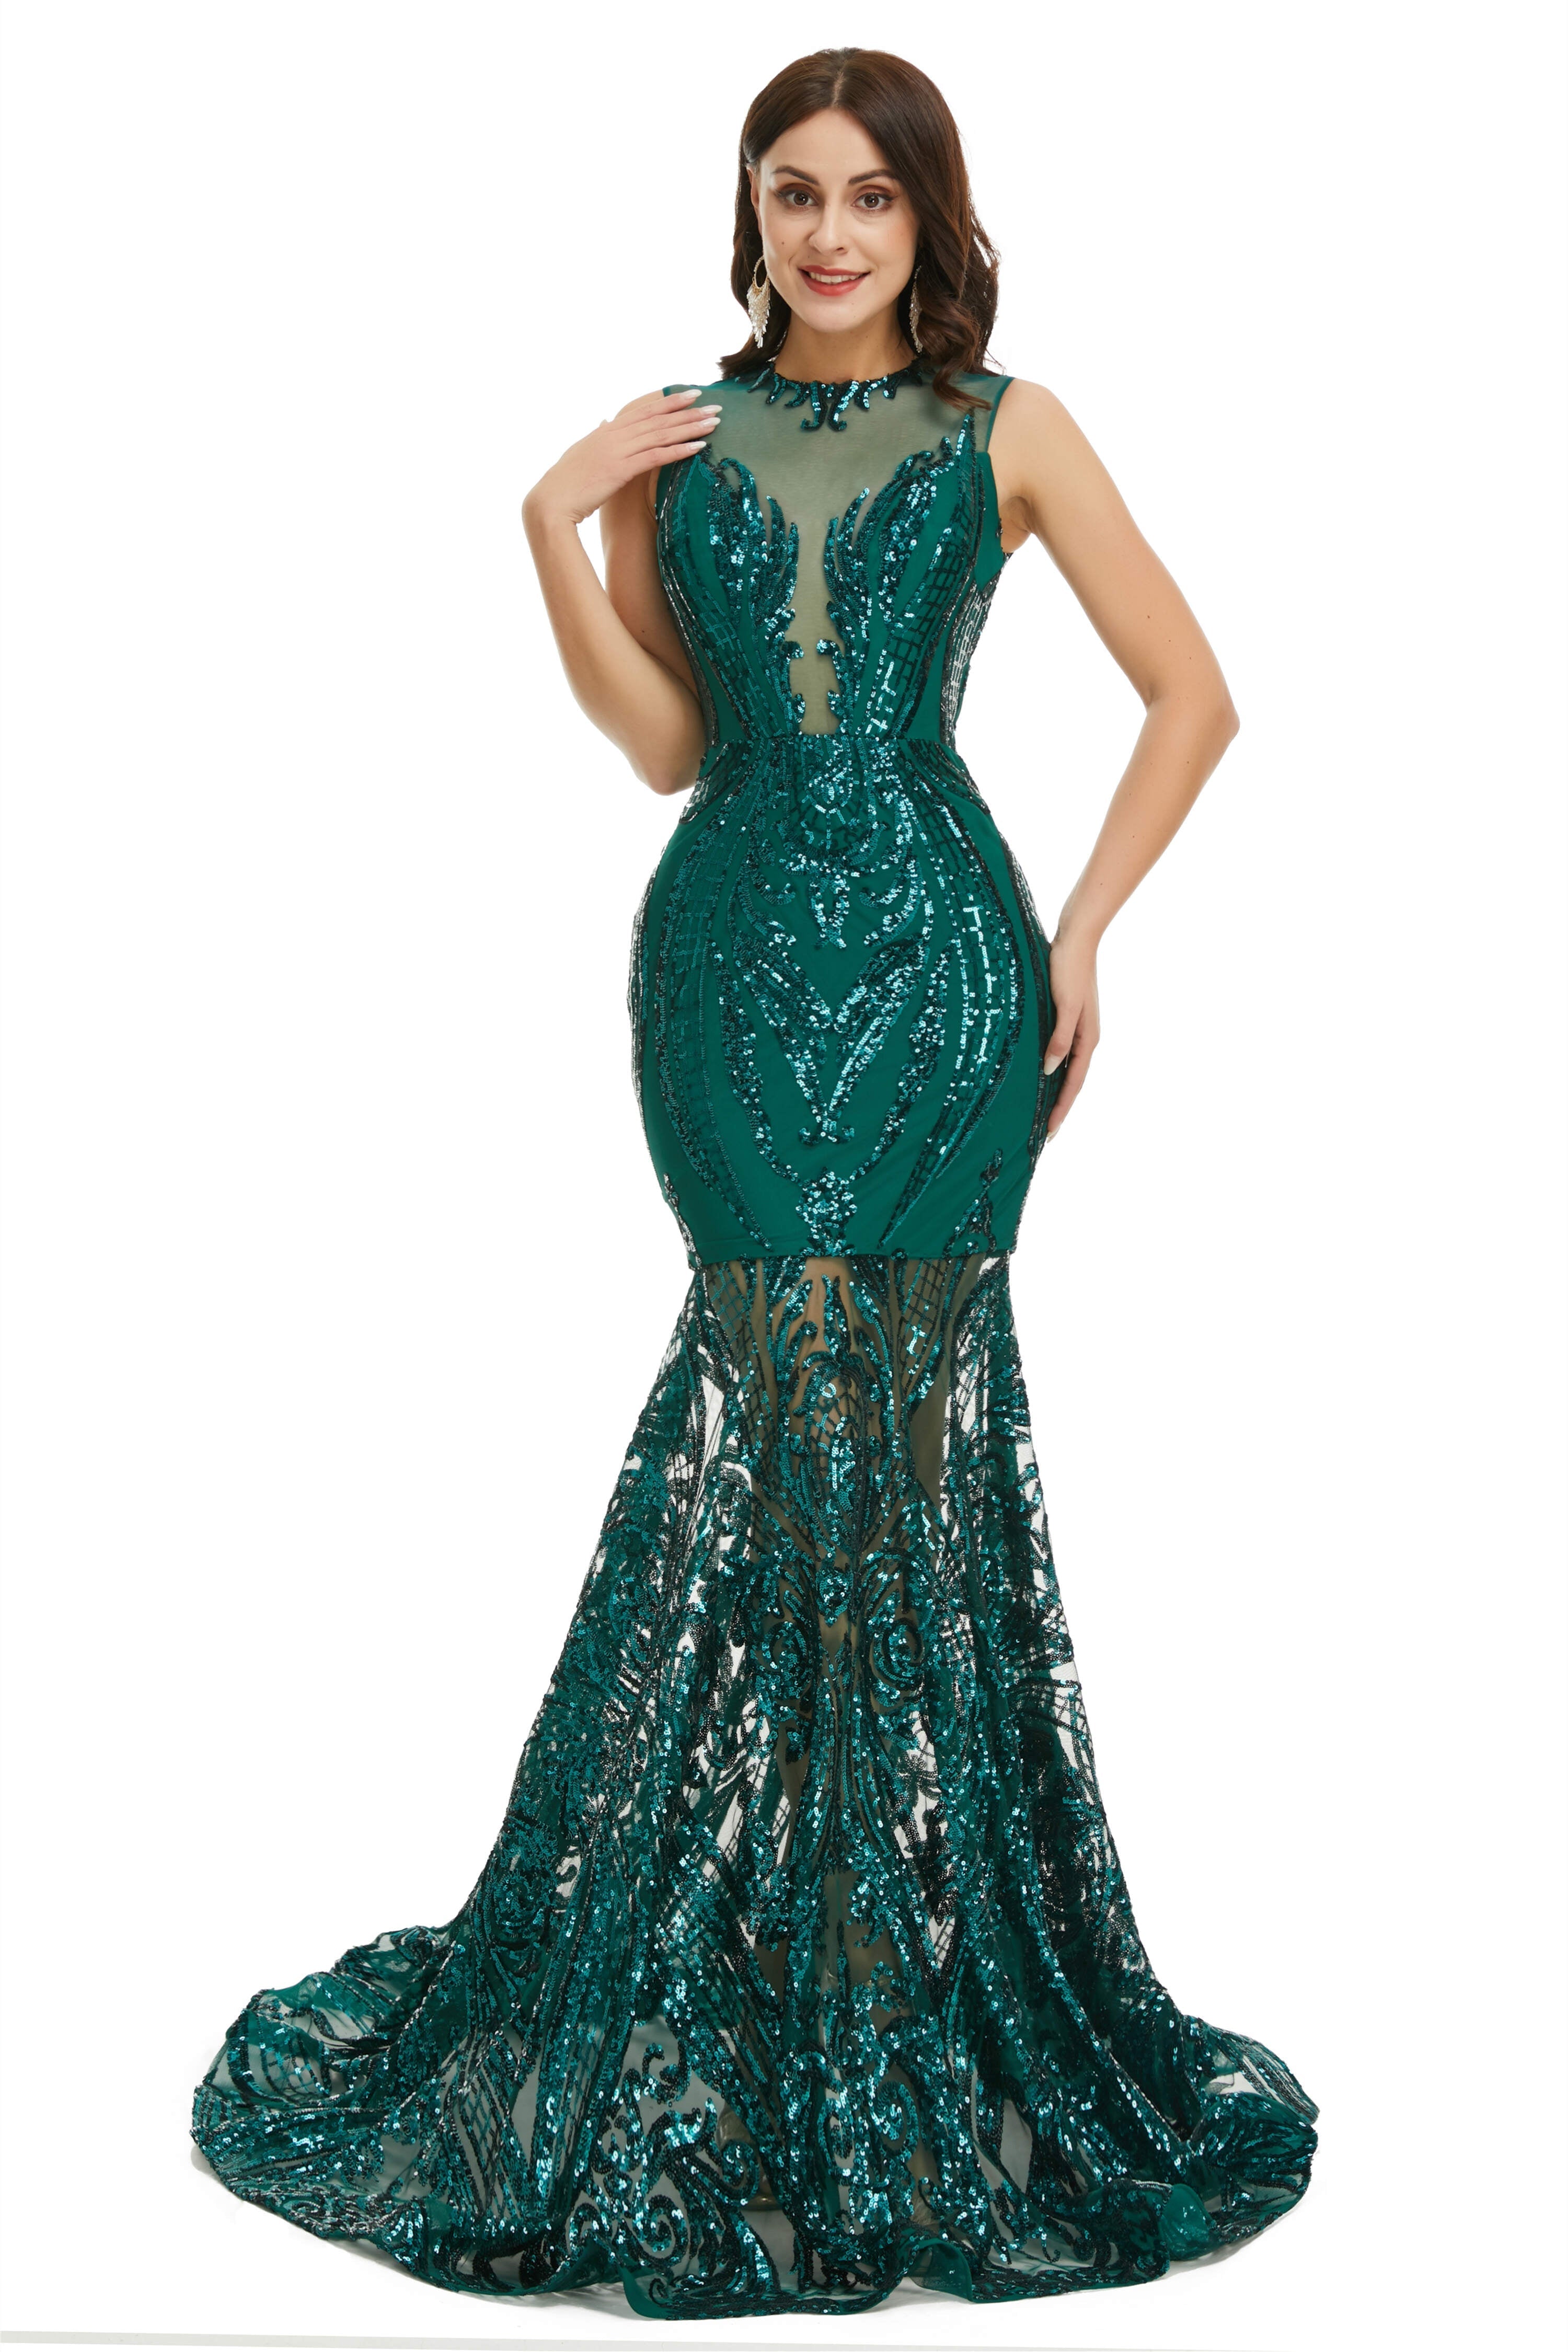 Sequins Sleeveless Floor Length Crew Neck Corset Prom Dresses outfit, Prom Dress Style